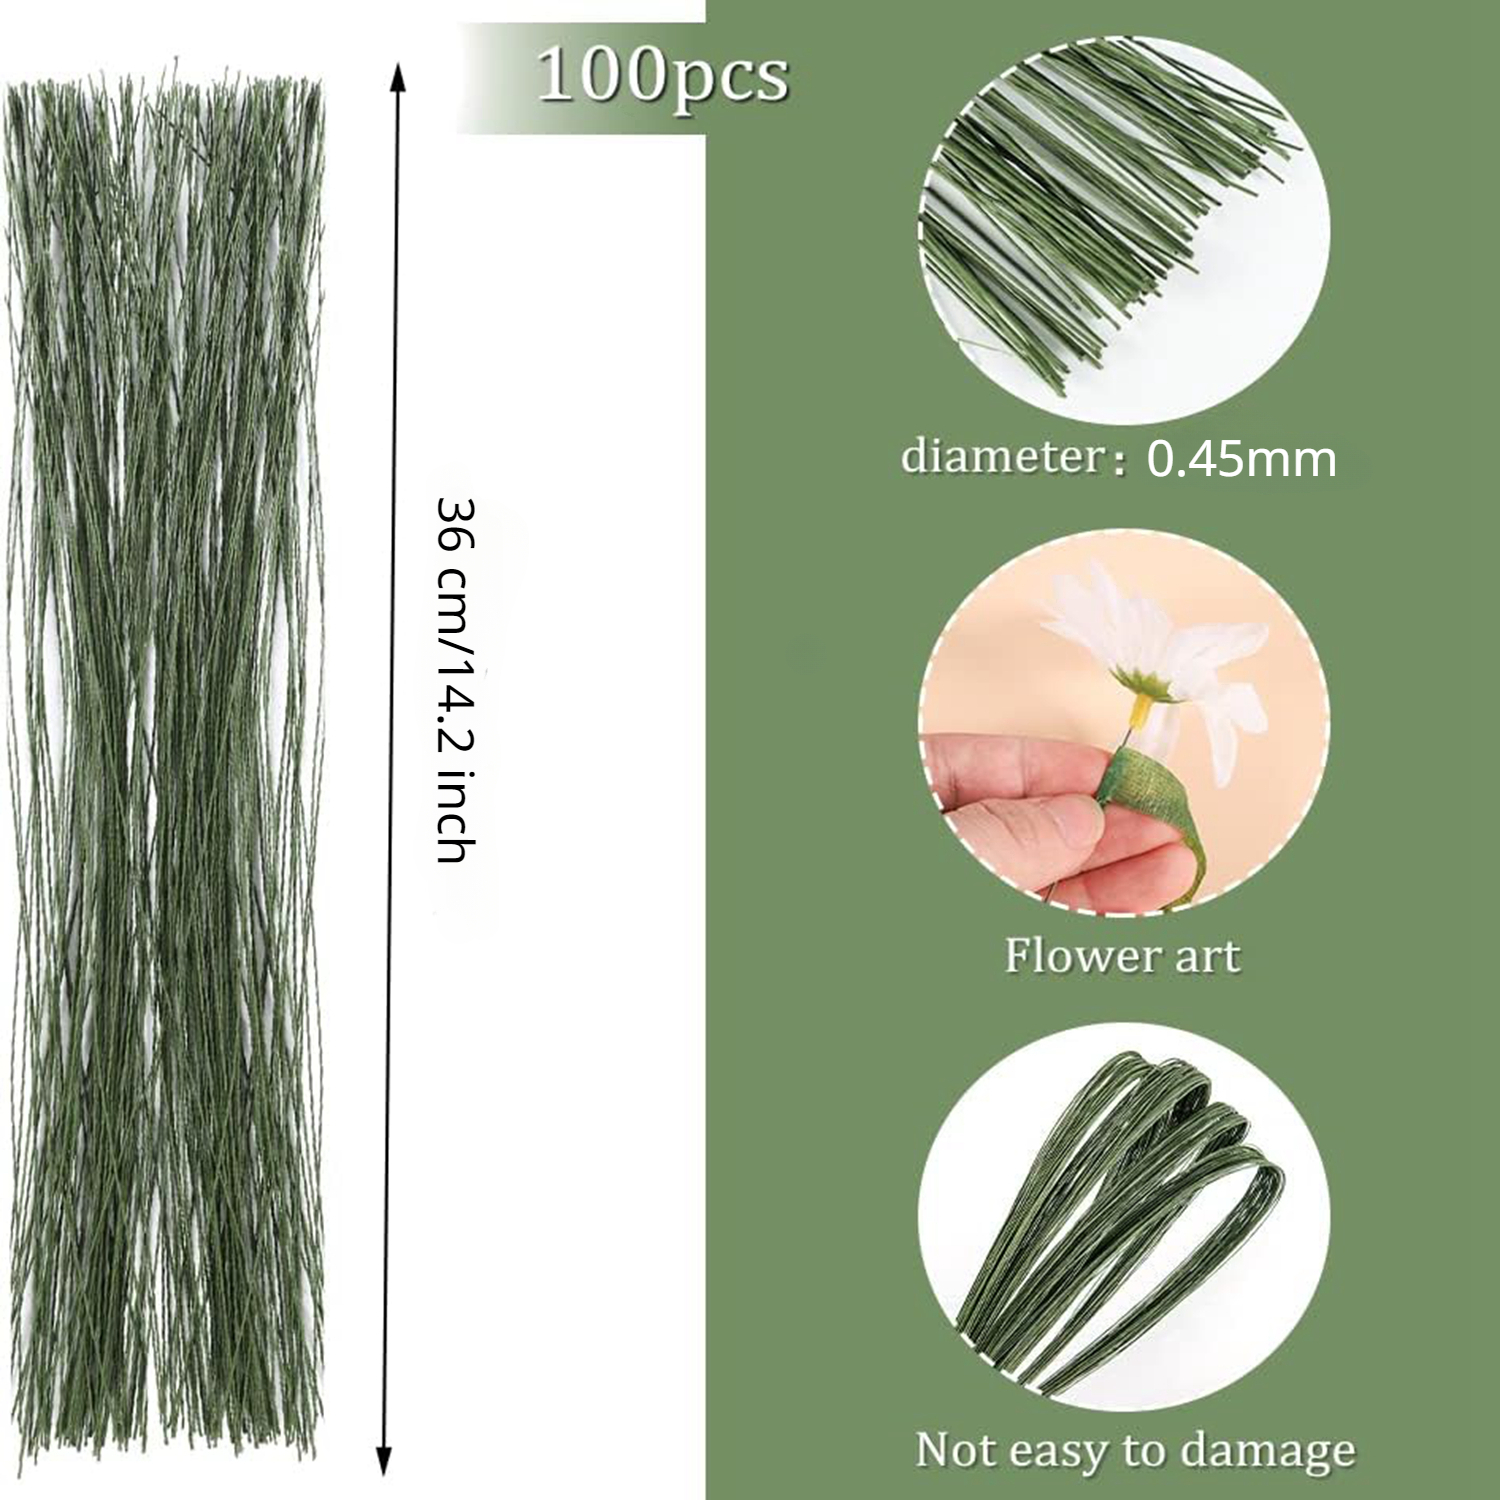 Floral Wire 100pcs Green Floral Wire For Crafts Flower Making Green  Crafting Floral Stem Wire Floral